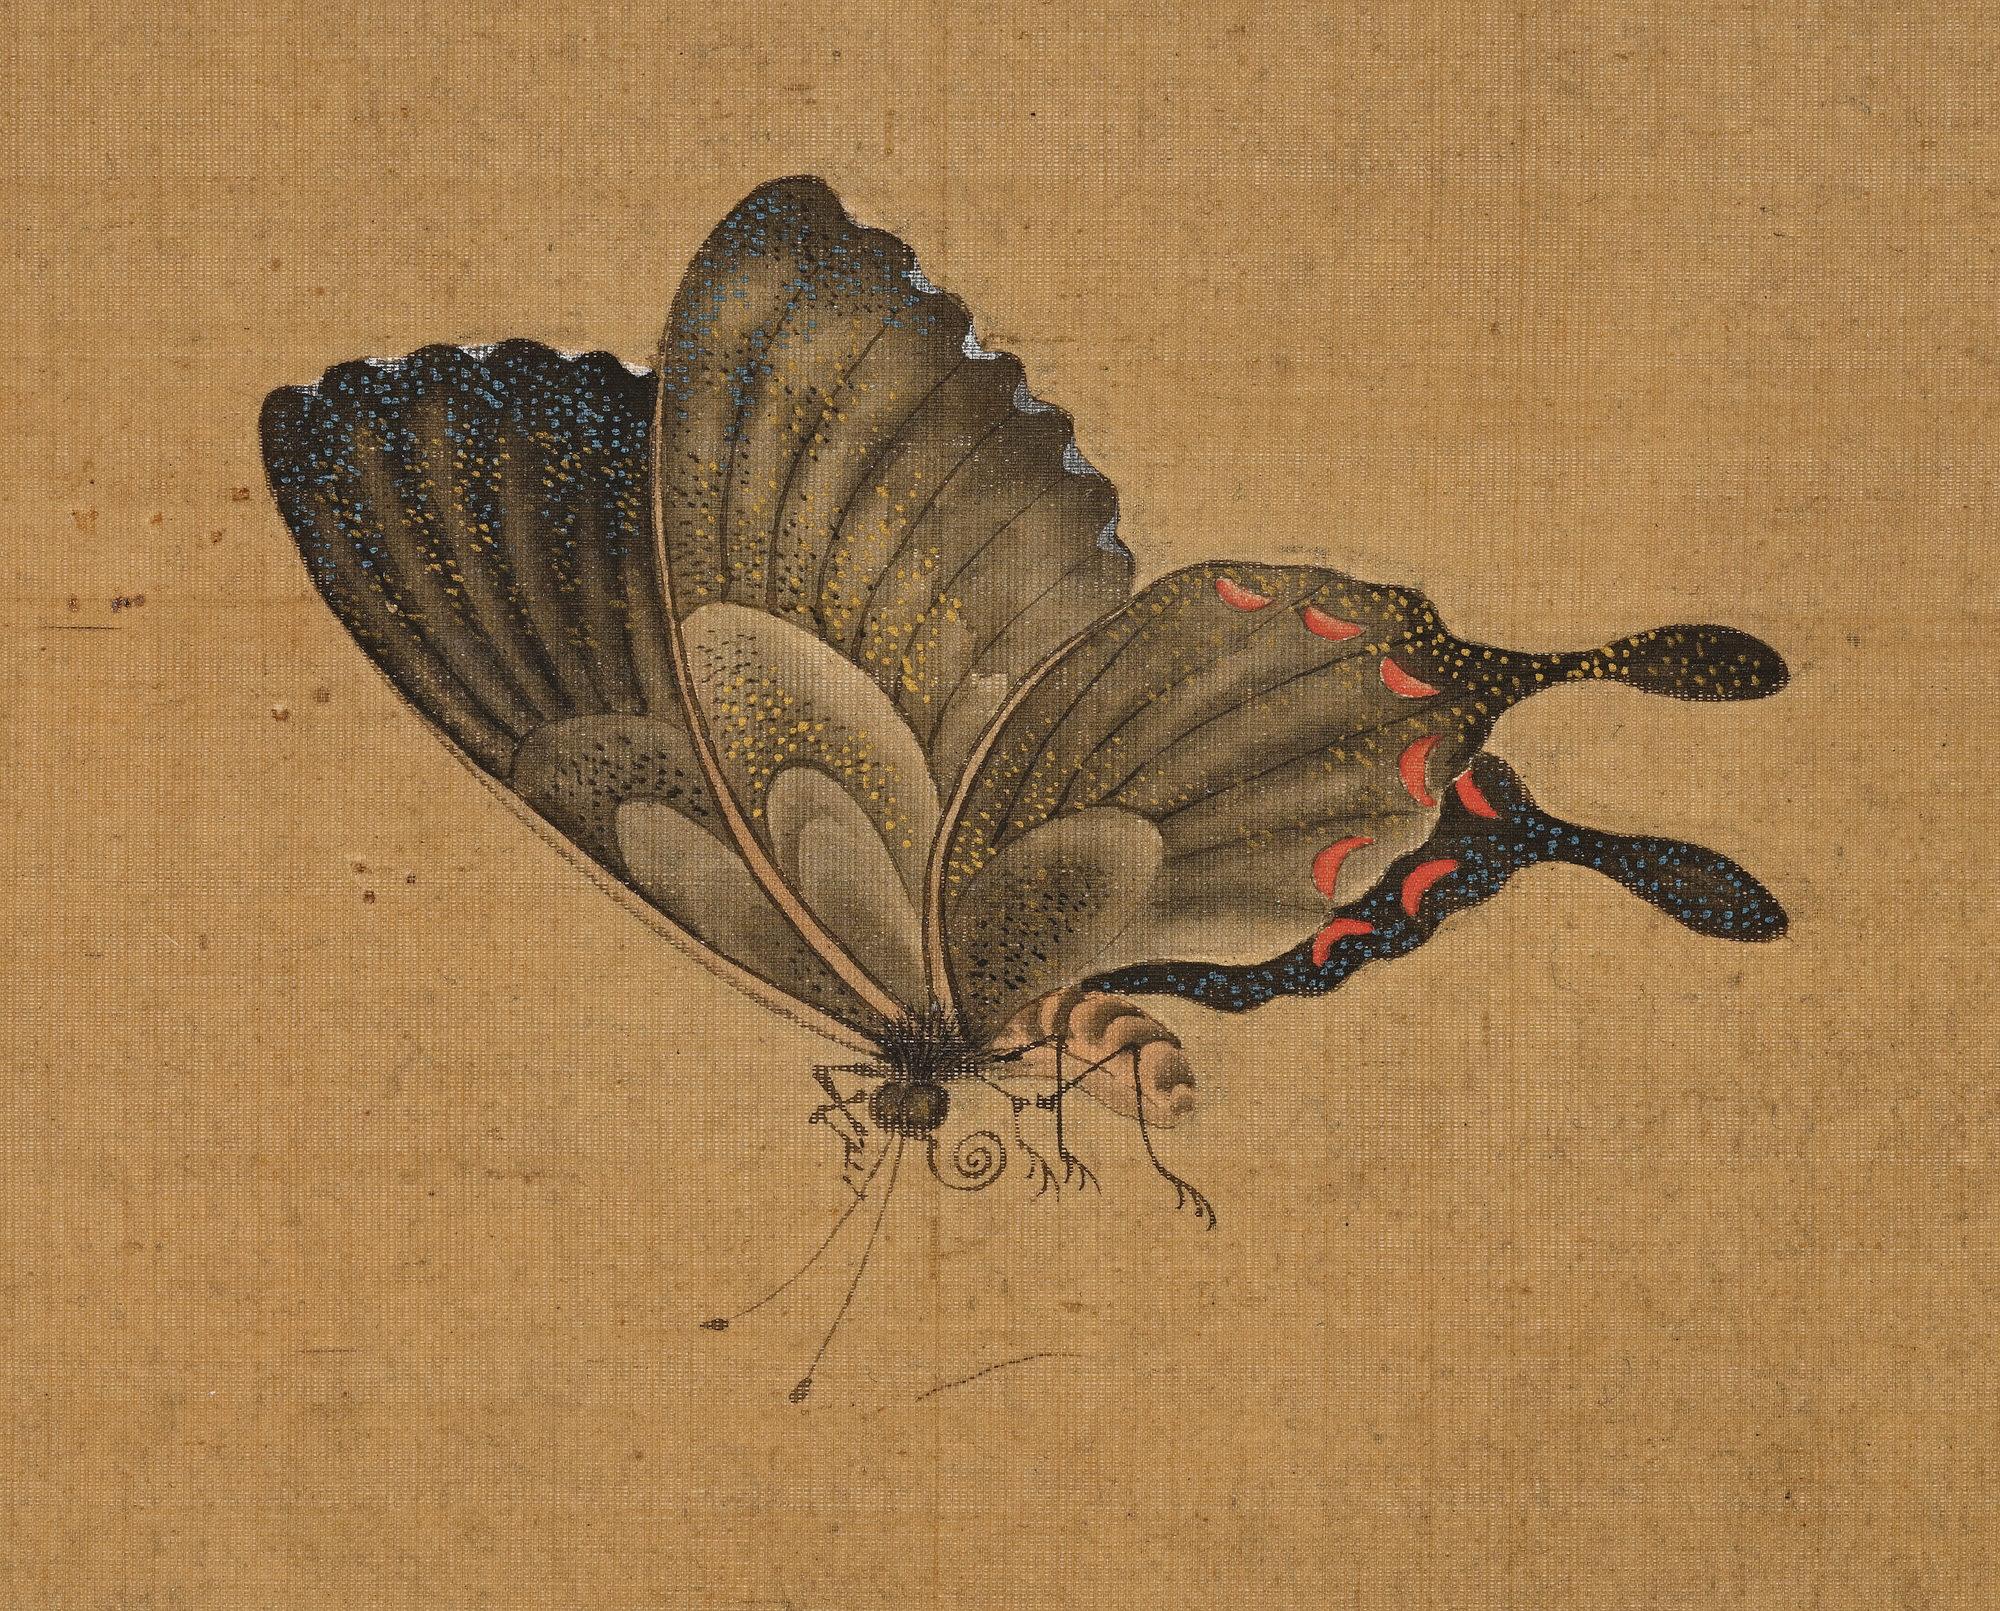 Hand-Painted 19th Century Japanese Scroll Painting by Igarashi Chikusa, Poppies & Butterflies For Sale